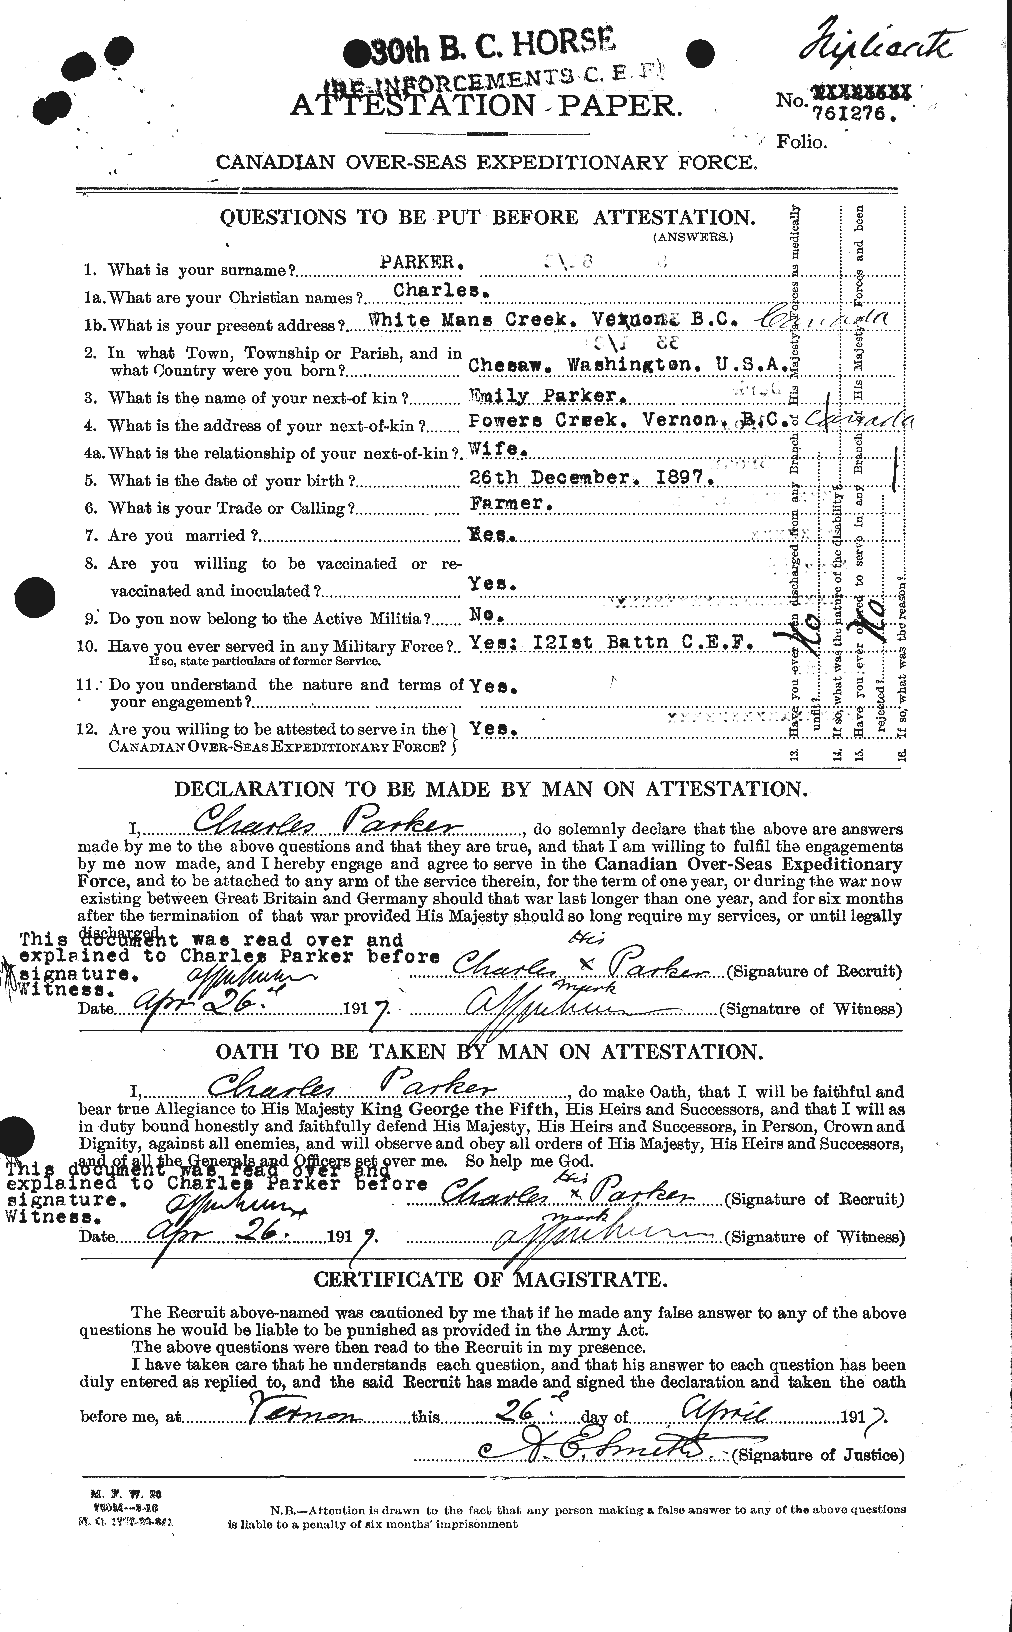 Personnel Records of the First World War - CEF 565056a